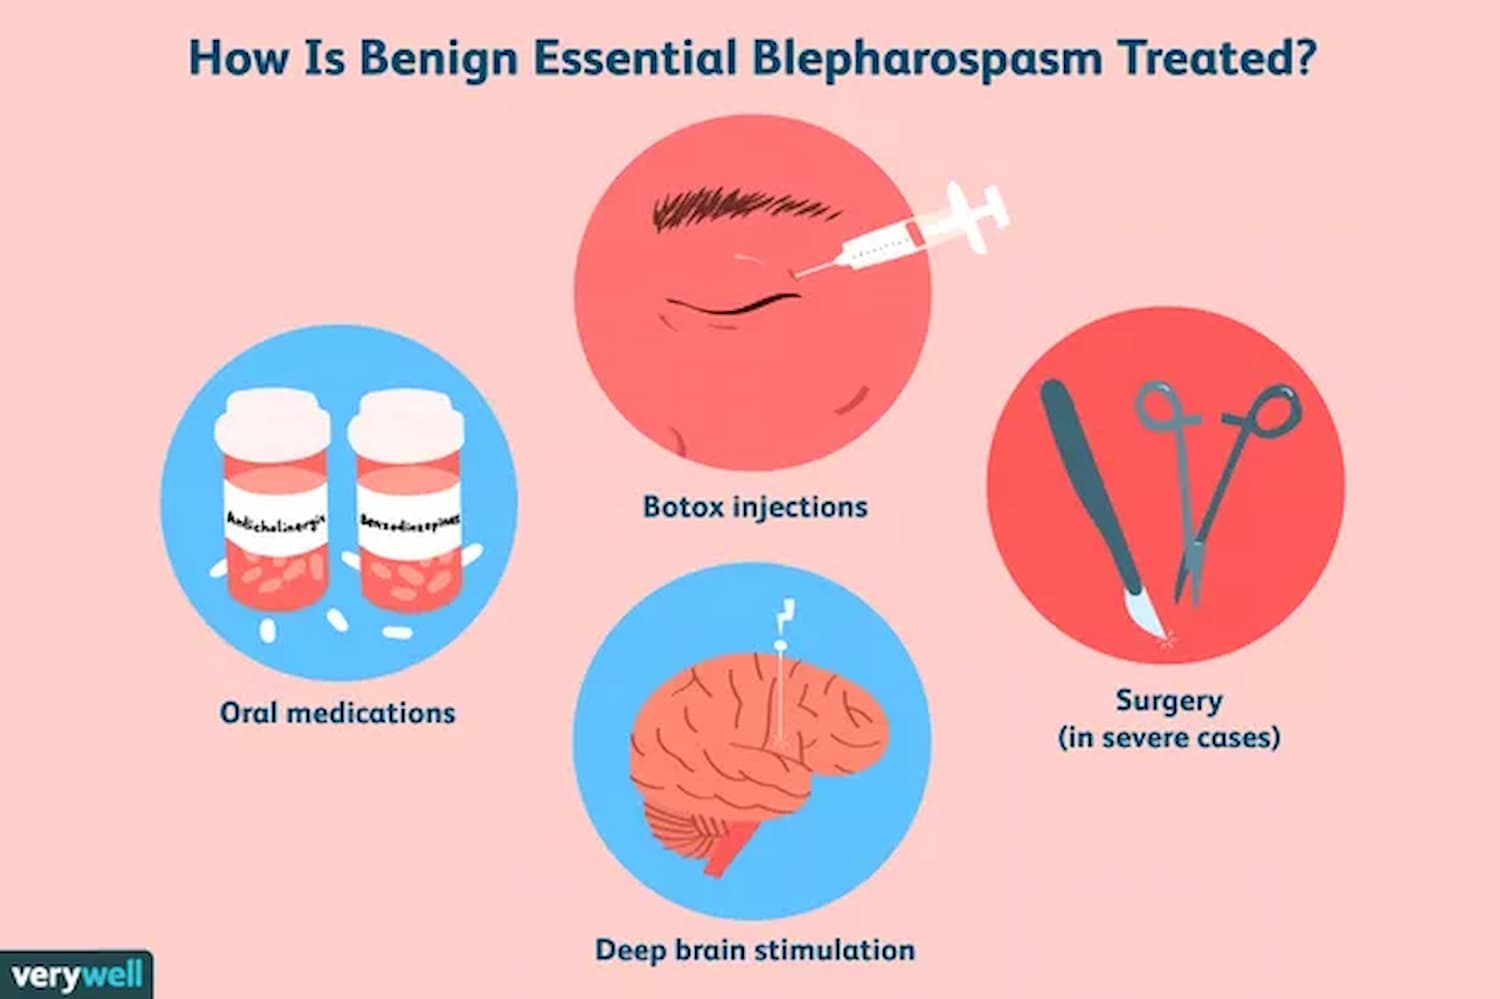 What are the treatment options for blepharospasm?